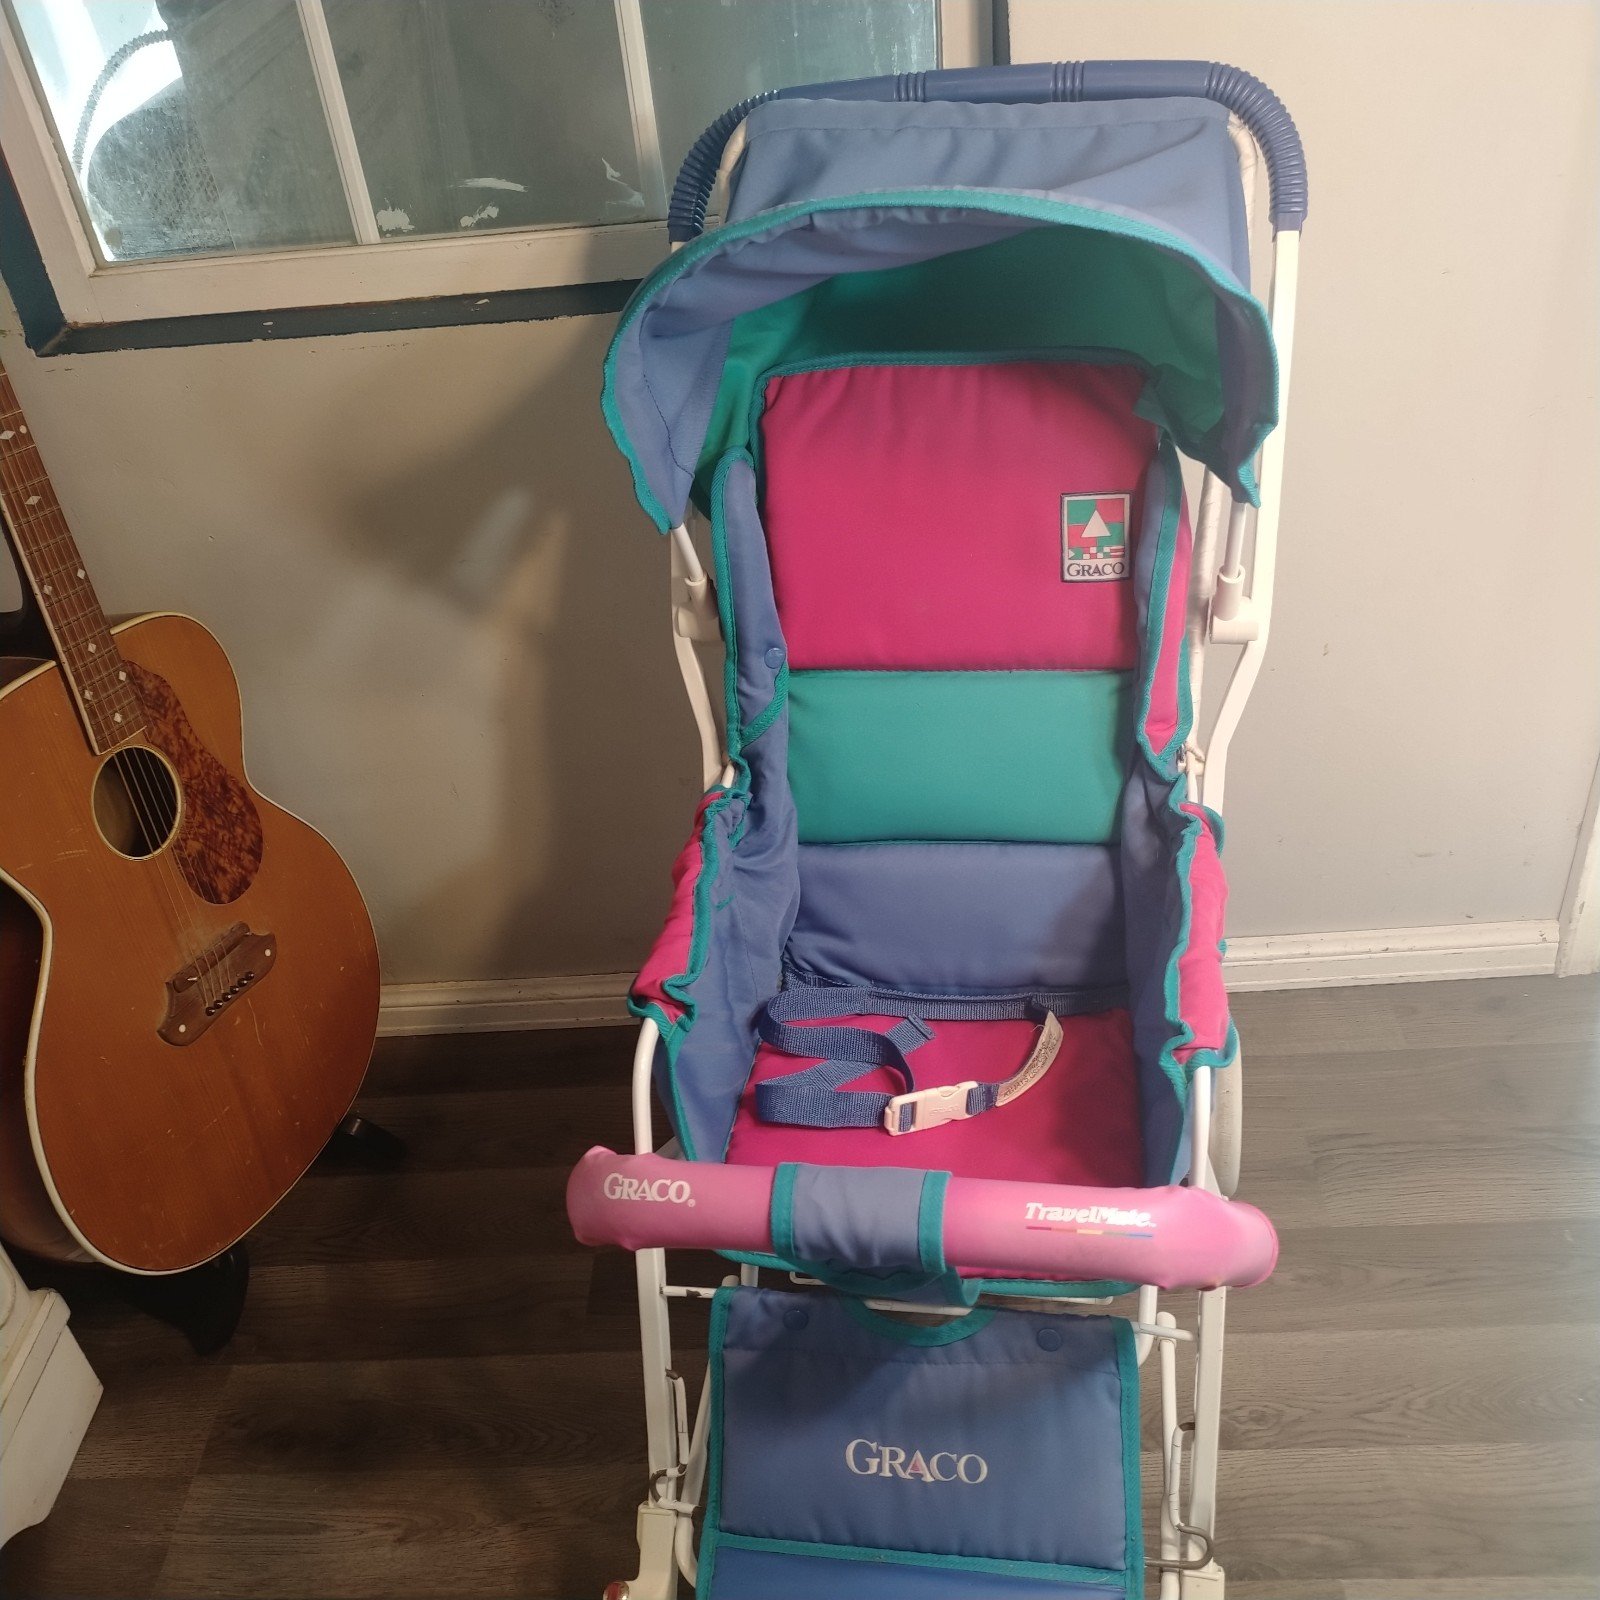 Vintage Graco Travel Mate Baby Stroller Buggy Stroll A Bed Pink Teal Color Block j3yiK1m2E